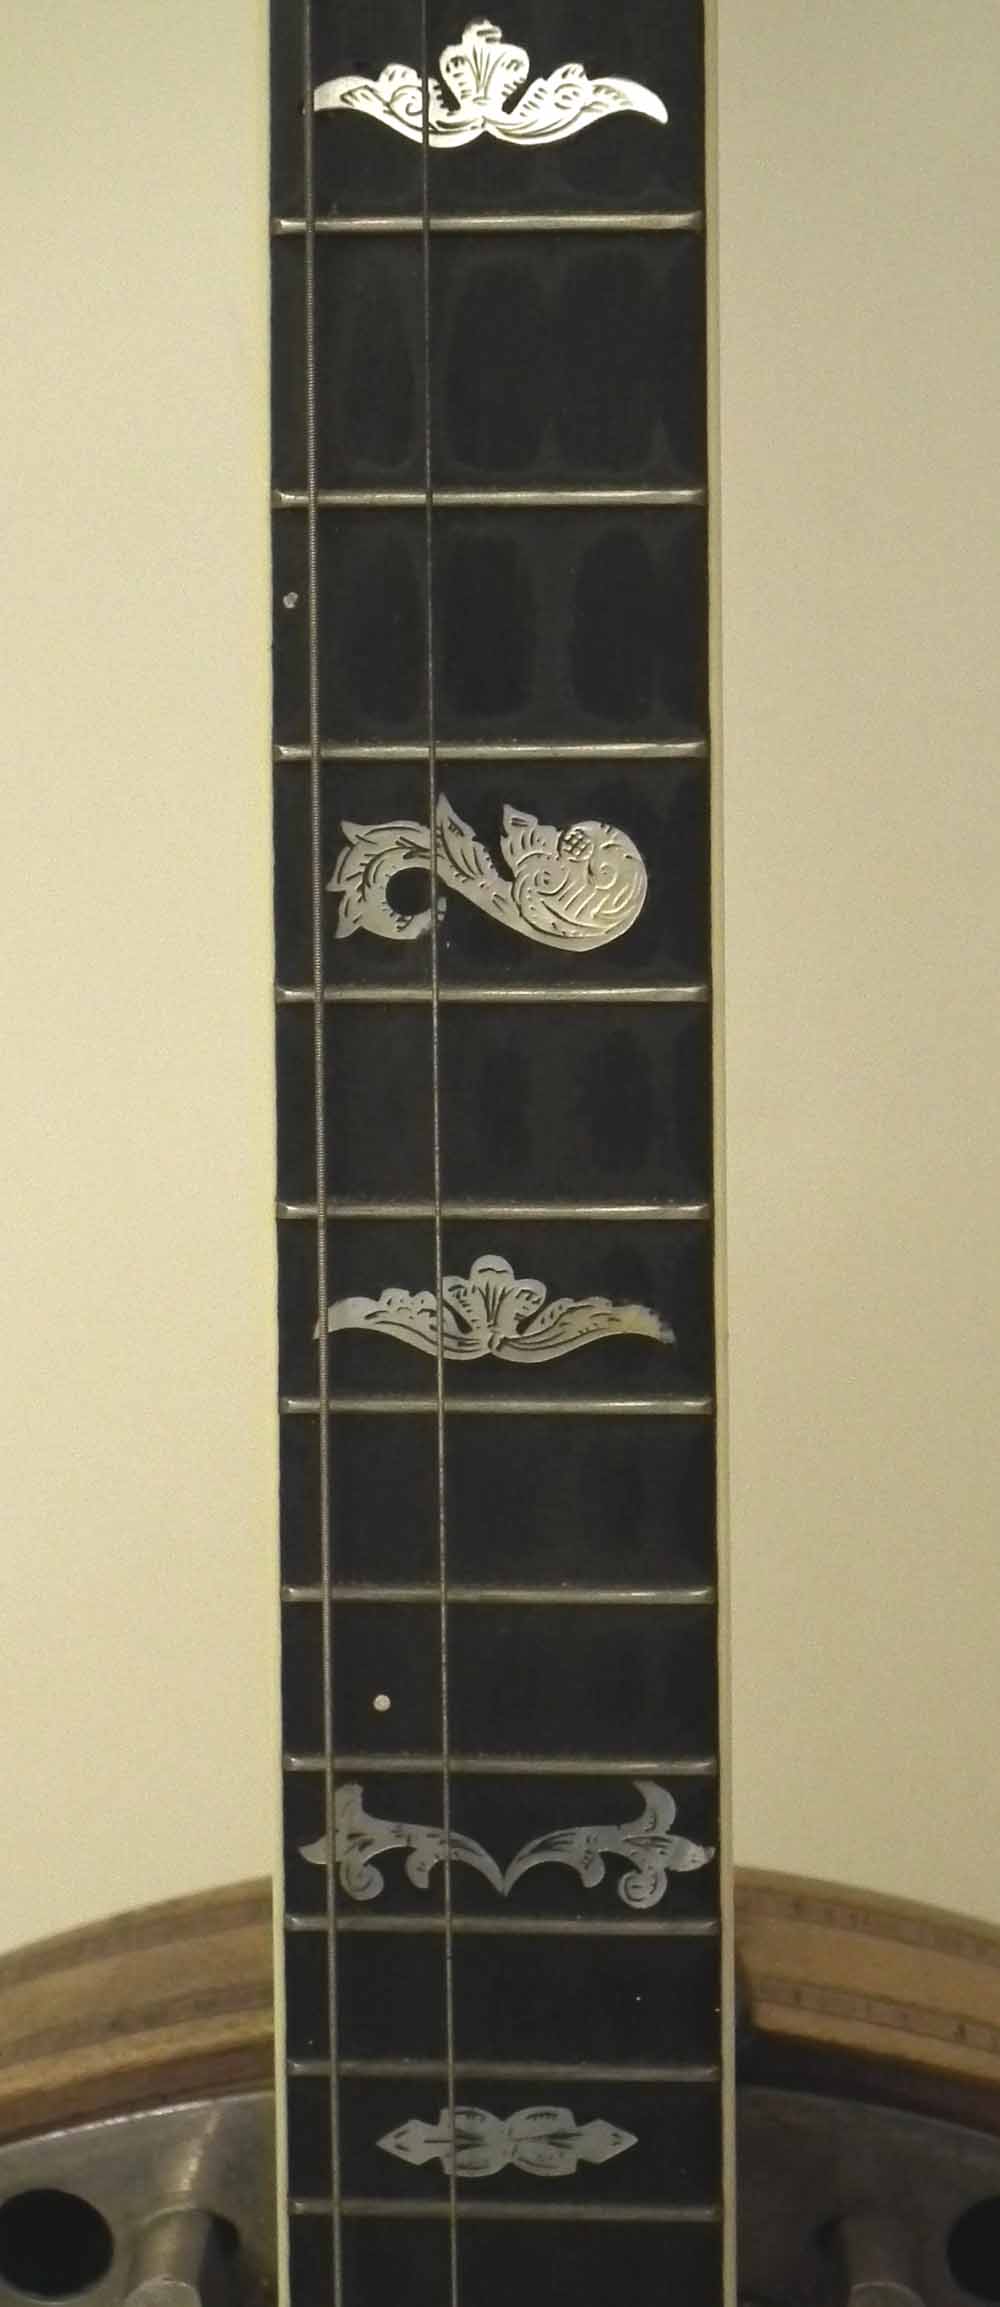 Clifford Essex Paragon four string Tenor Banjo, with engraved pearl headstock and fingerboard - Image 5 of 21